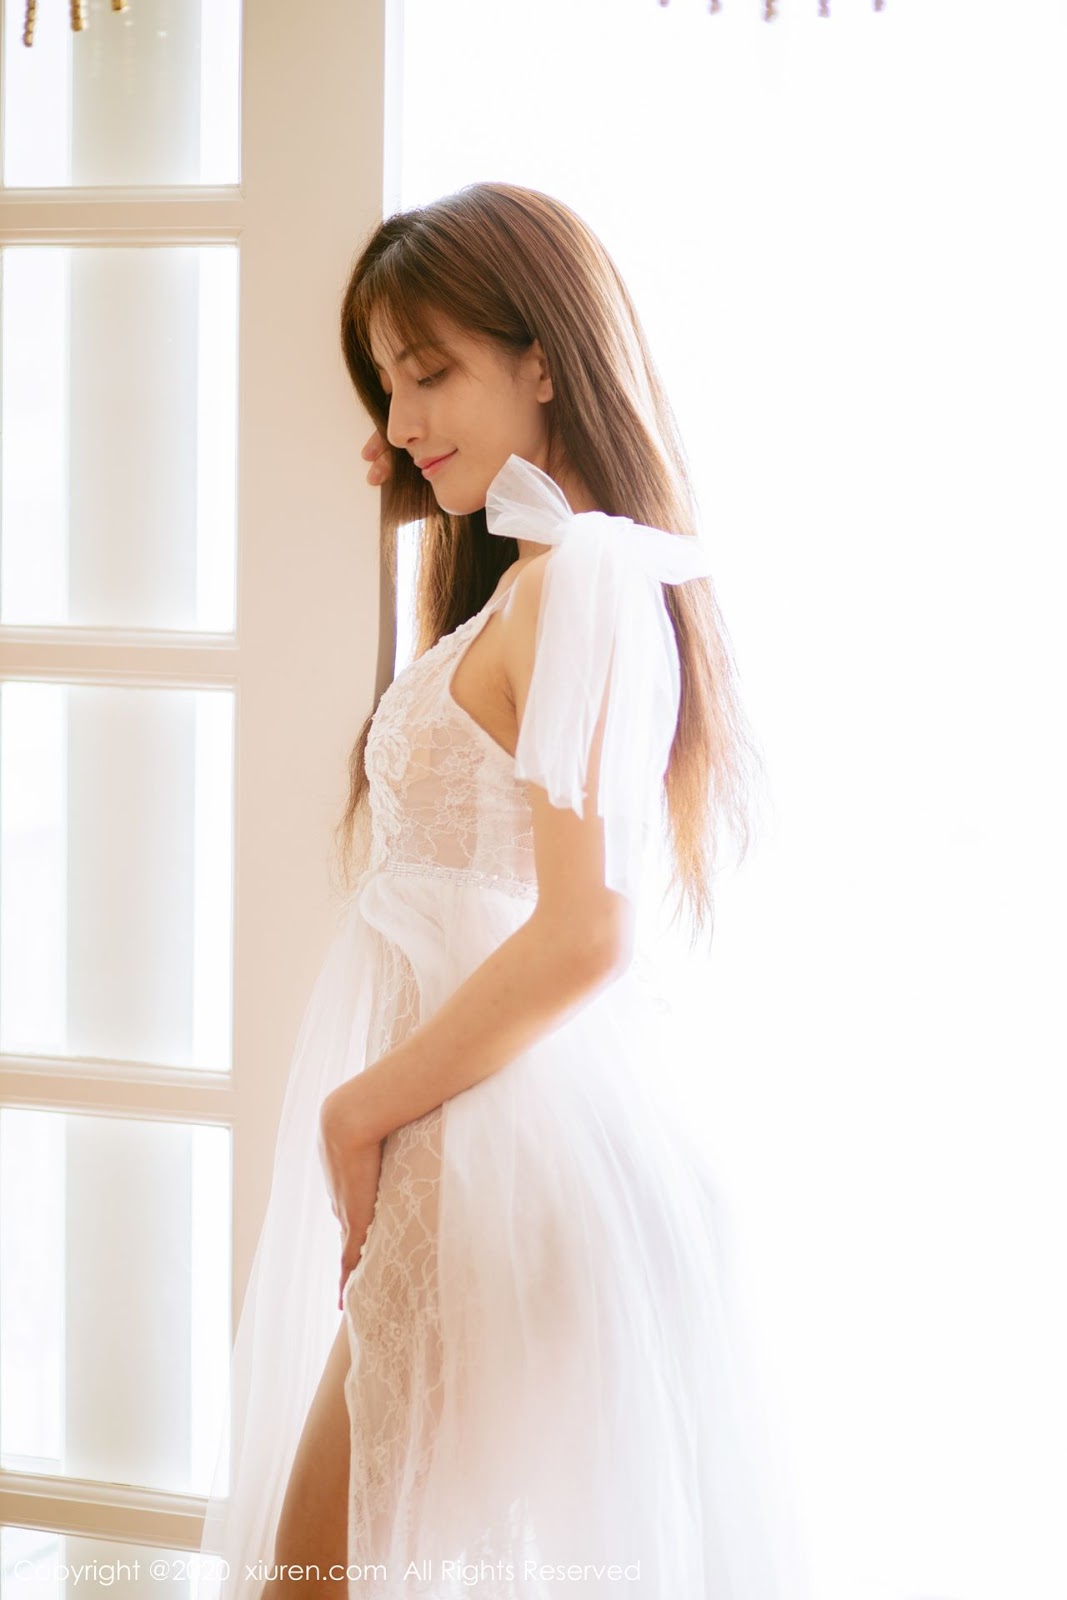 XIUREN No.1914 - Chinese model 林文文Yooki so Sexy with Transparent White Lace Dress - Picture 57